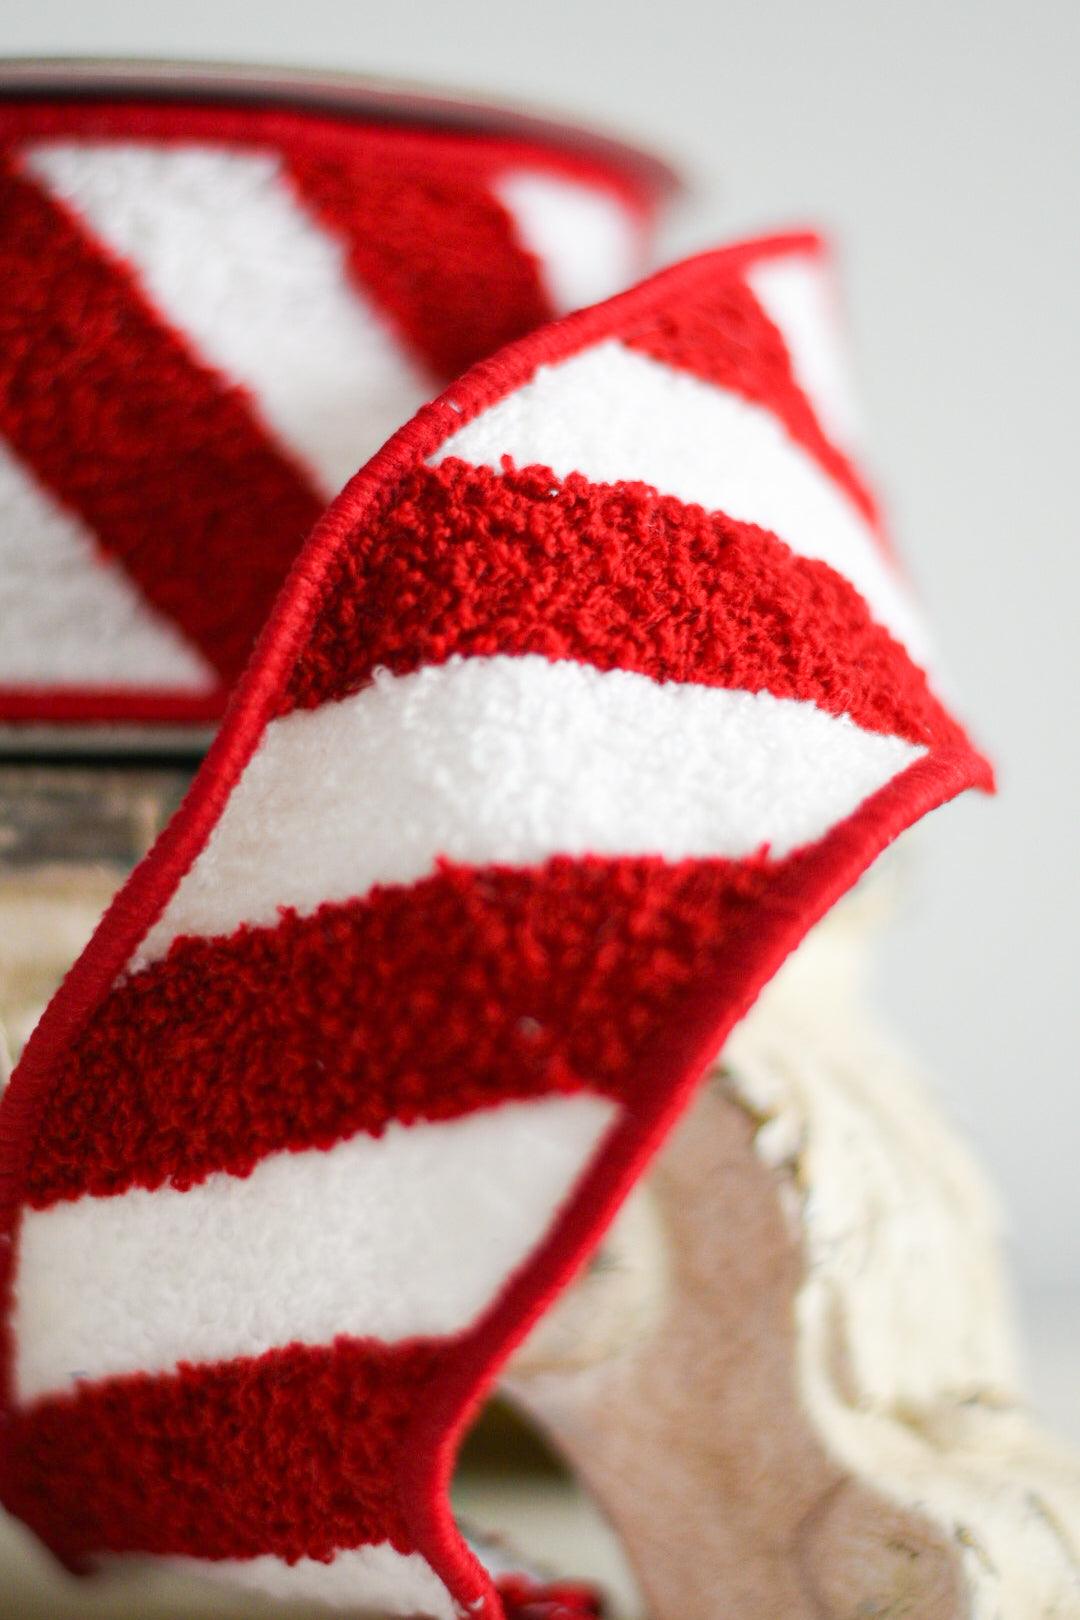 TERRY CANDY STRIPES 2.5"X5YD / RED WHITE - Burlap and Bling Decor